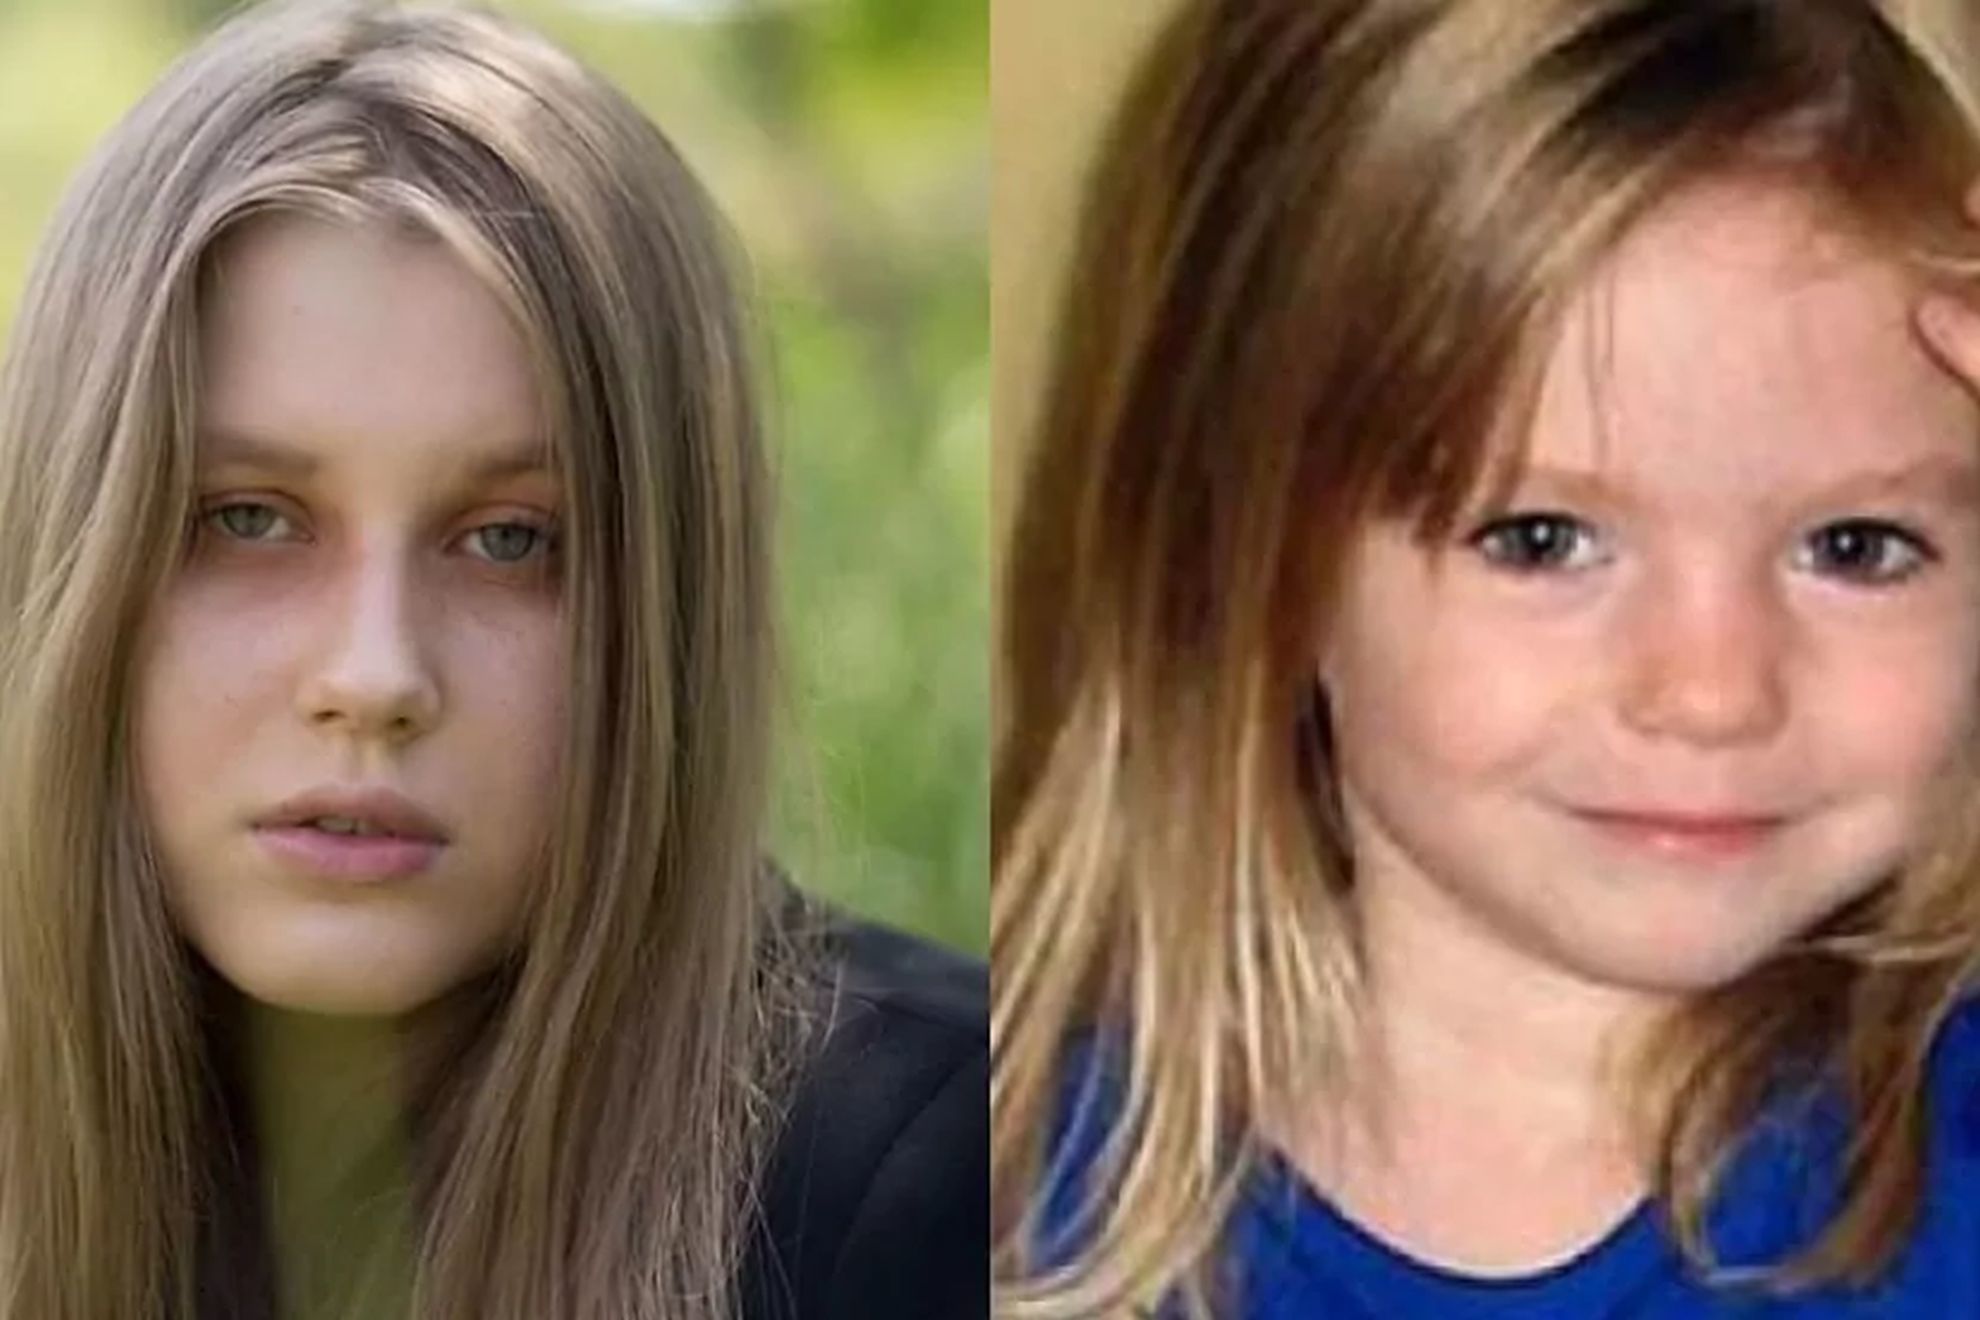 Biometric analysis rubbishes claims of Polish woman claiming to be Madeleine McCann